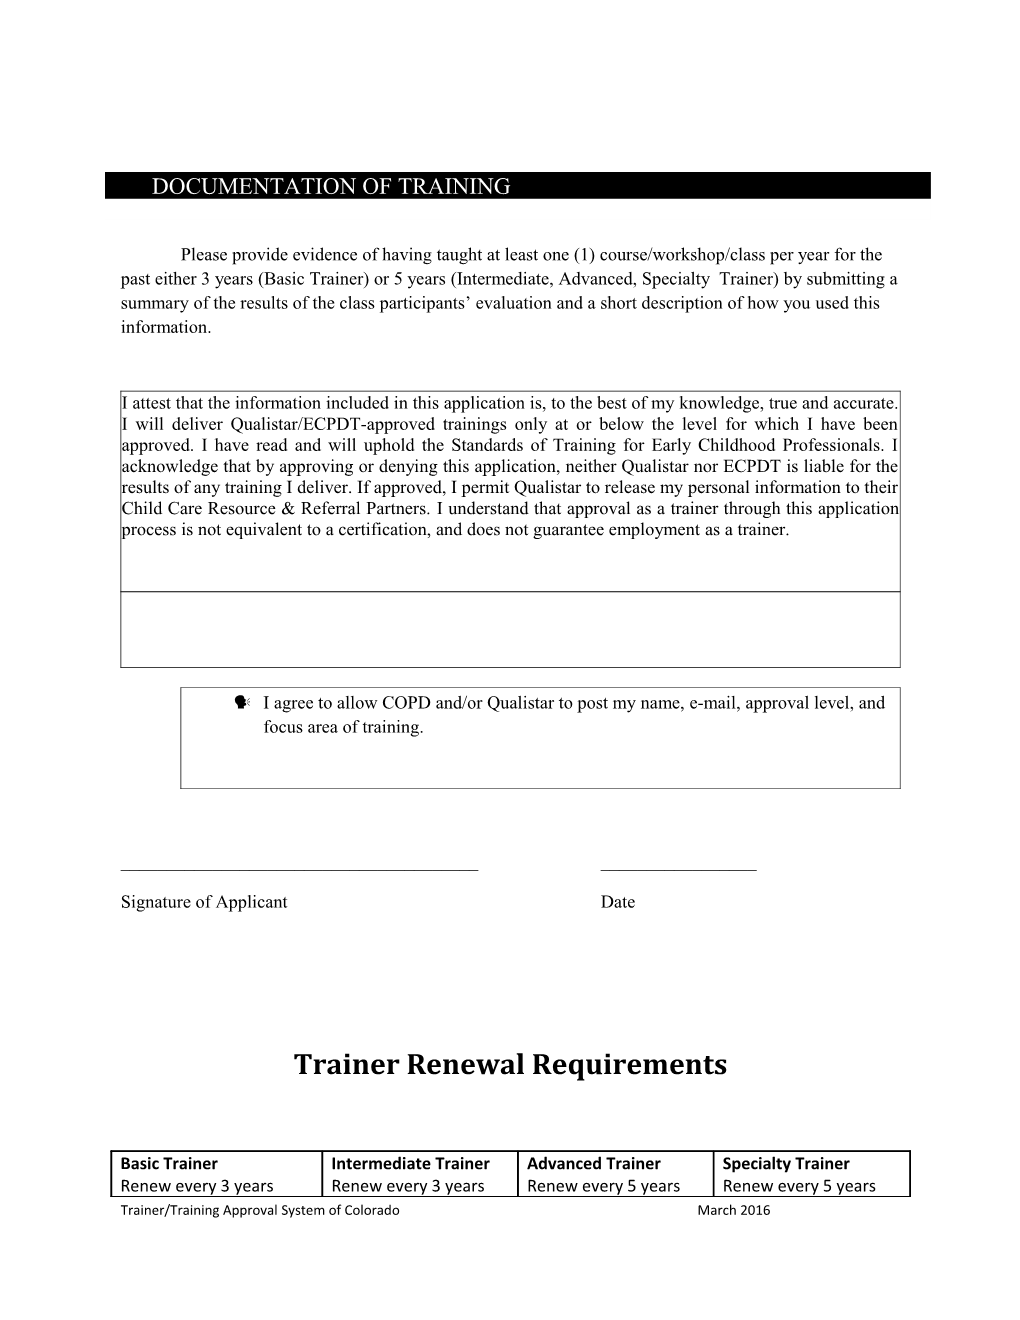 Trainer Approval Renewal Application